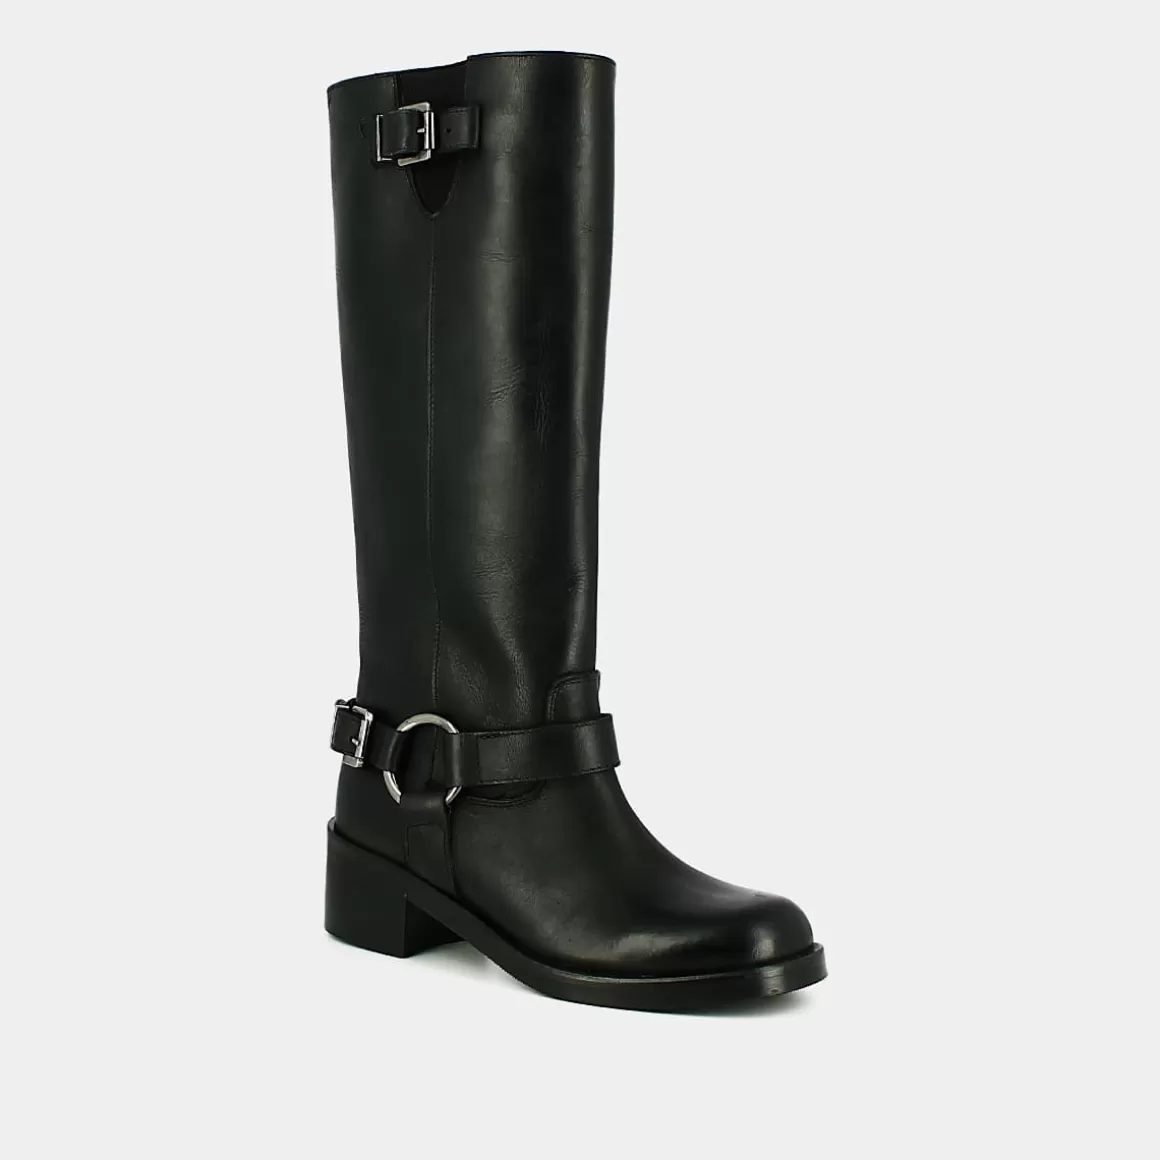 High boots with round toes and buckles<Jonak Flash Sale